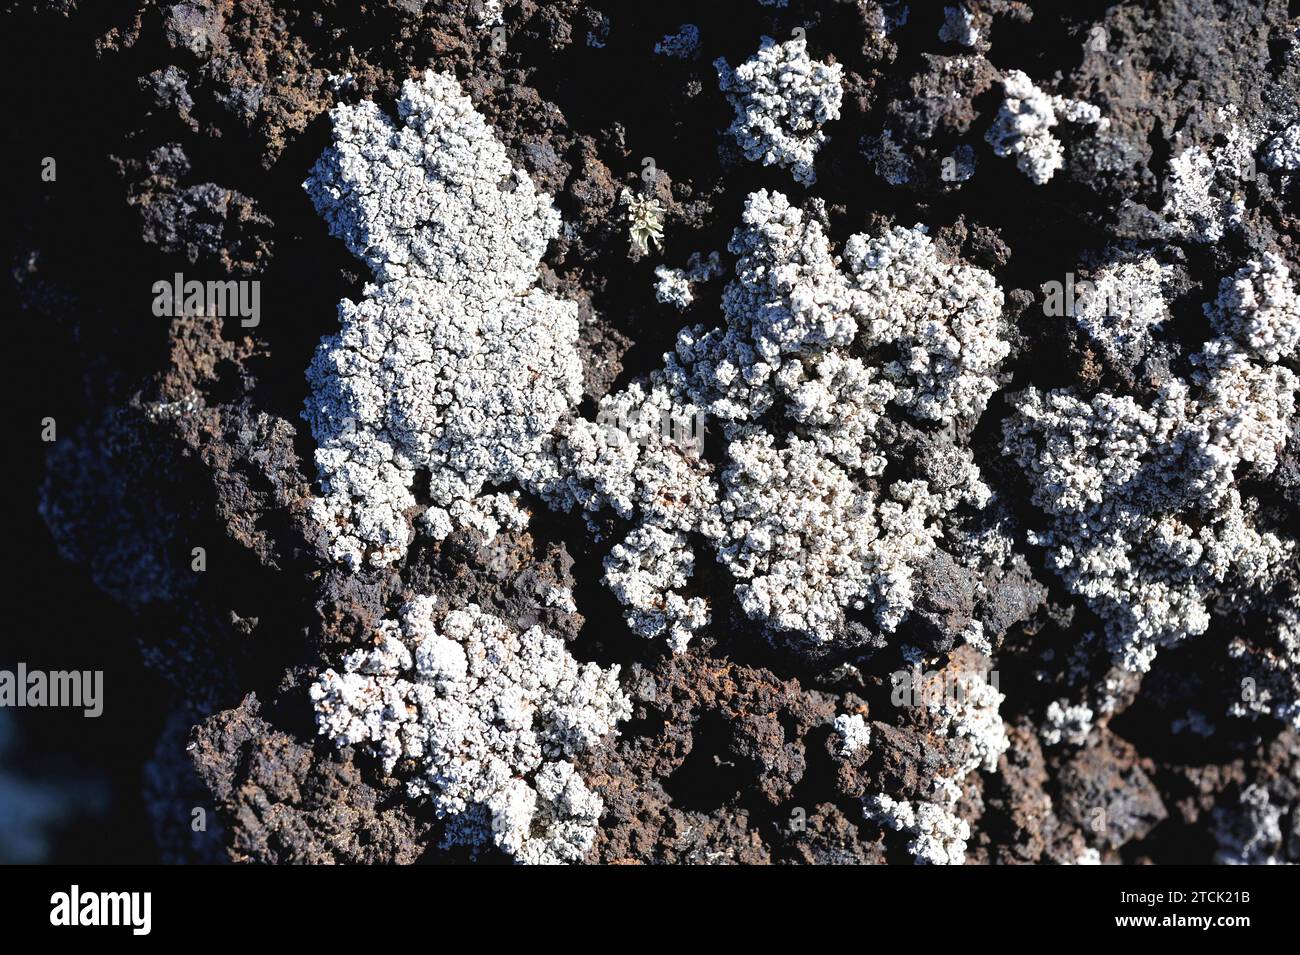 Stereocaulon vesuvianum is a fruticulose lichen taht grows on volcanic rocks. This photo was taken in Lanzarote Island, Canary Islands, Spain. Stock Photo